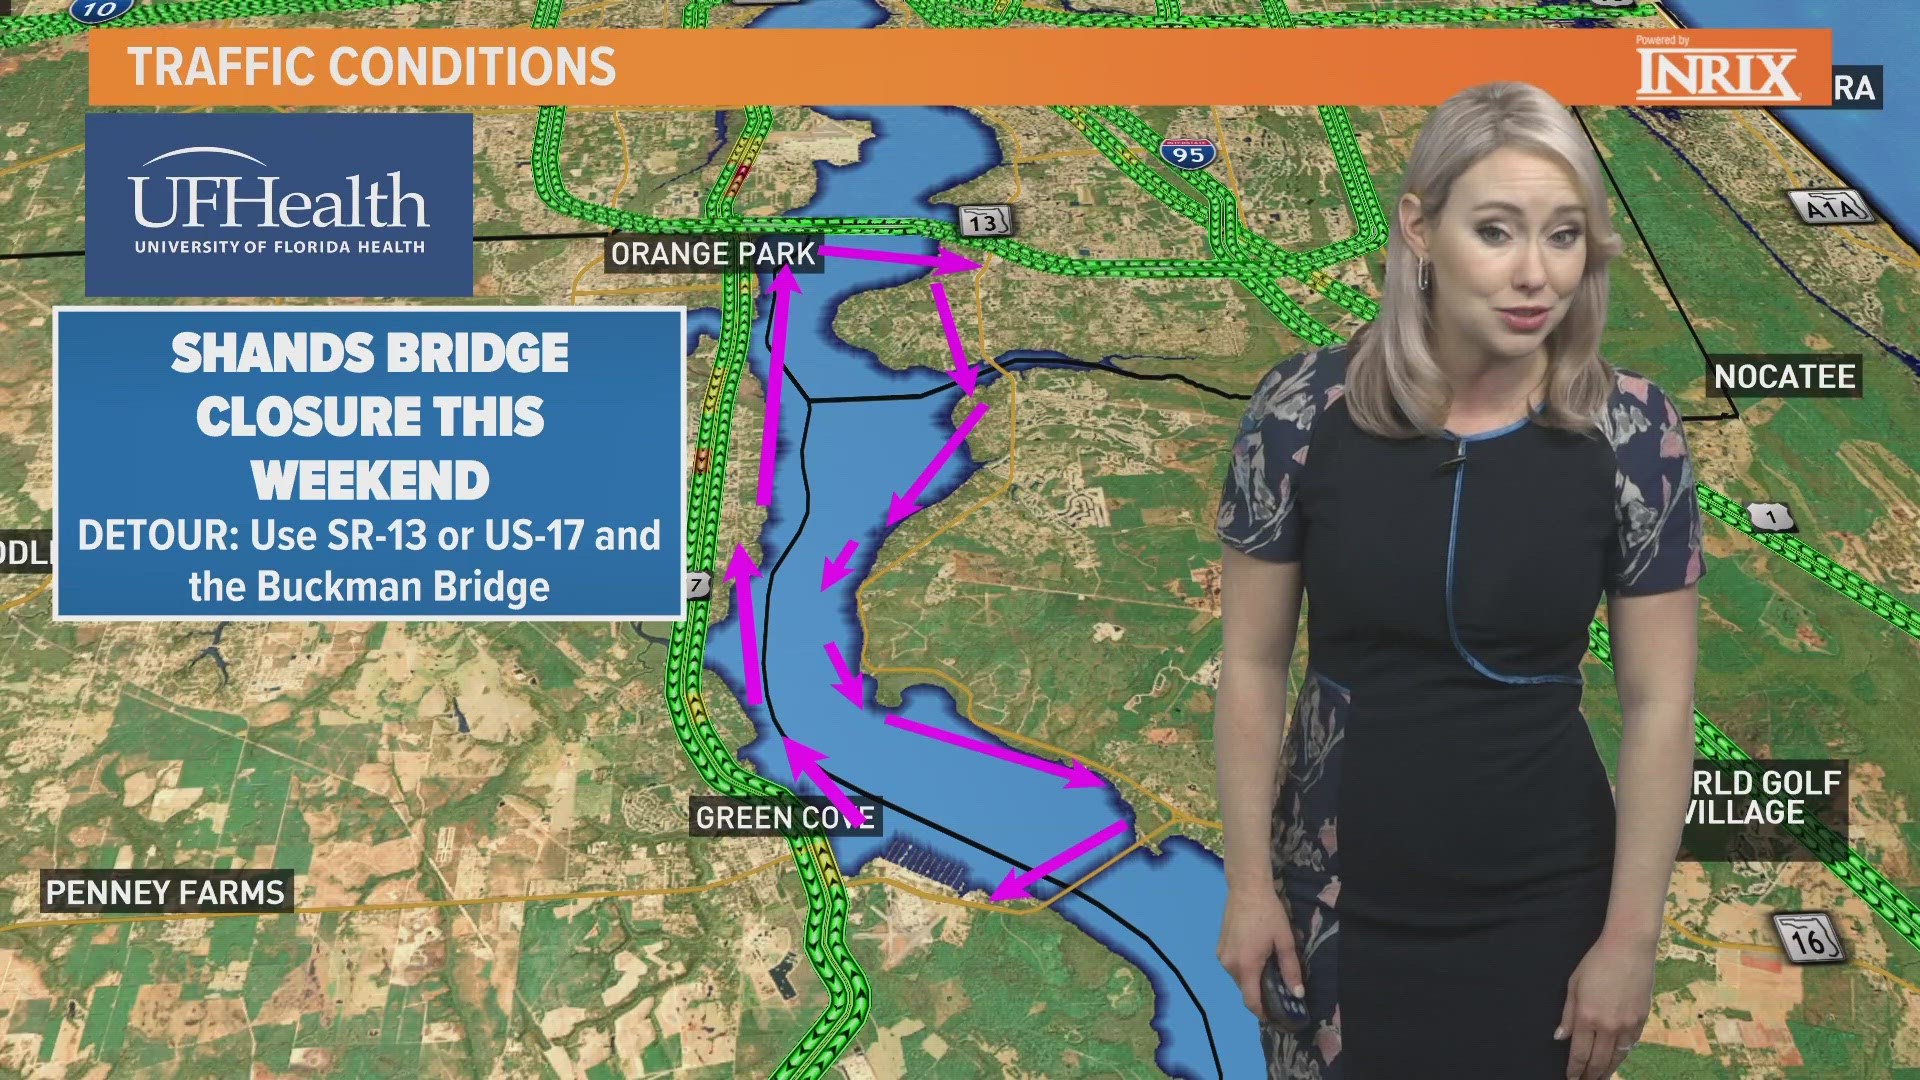 Drivers can take the Buckman Bridge to cross the St. Johns River as an alternate route.